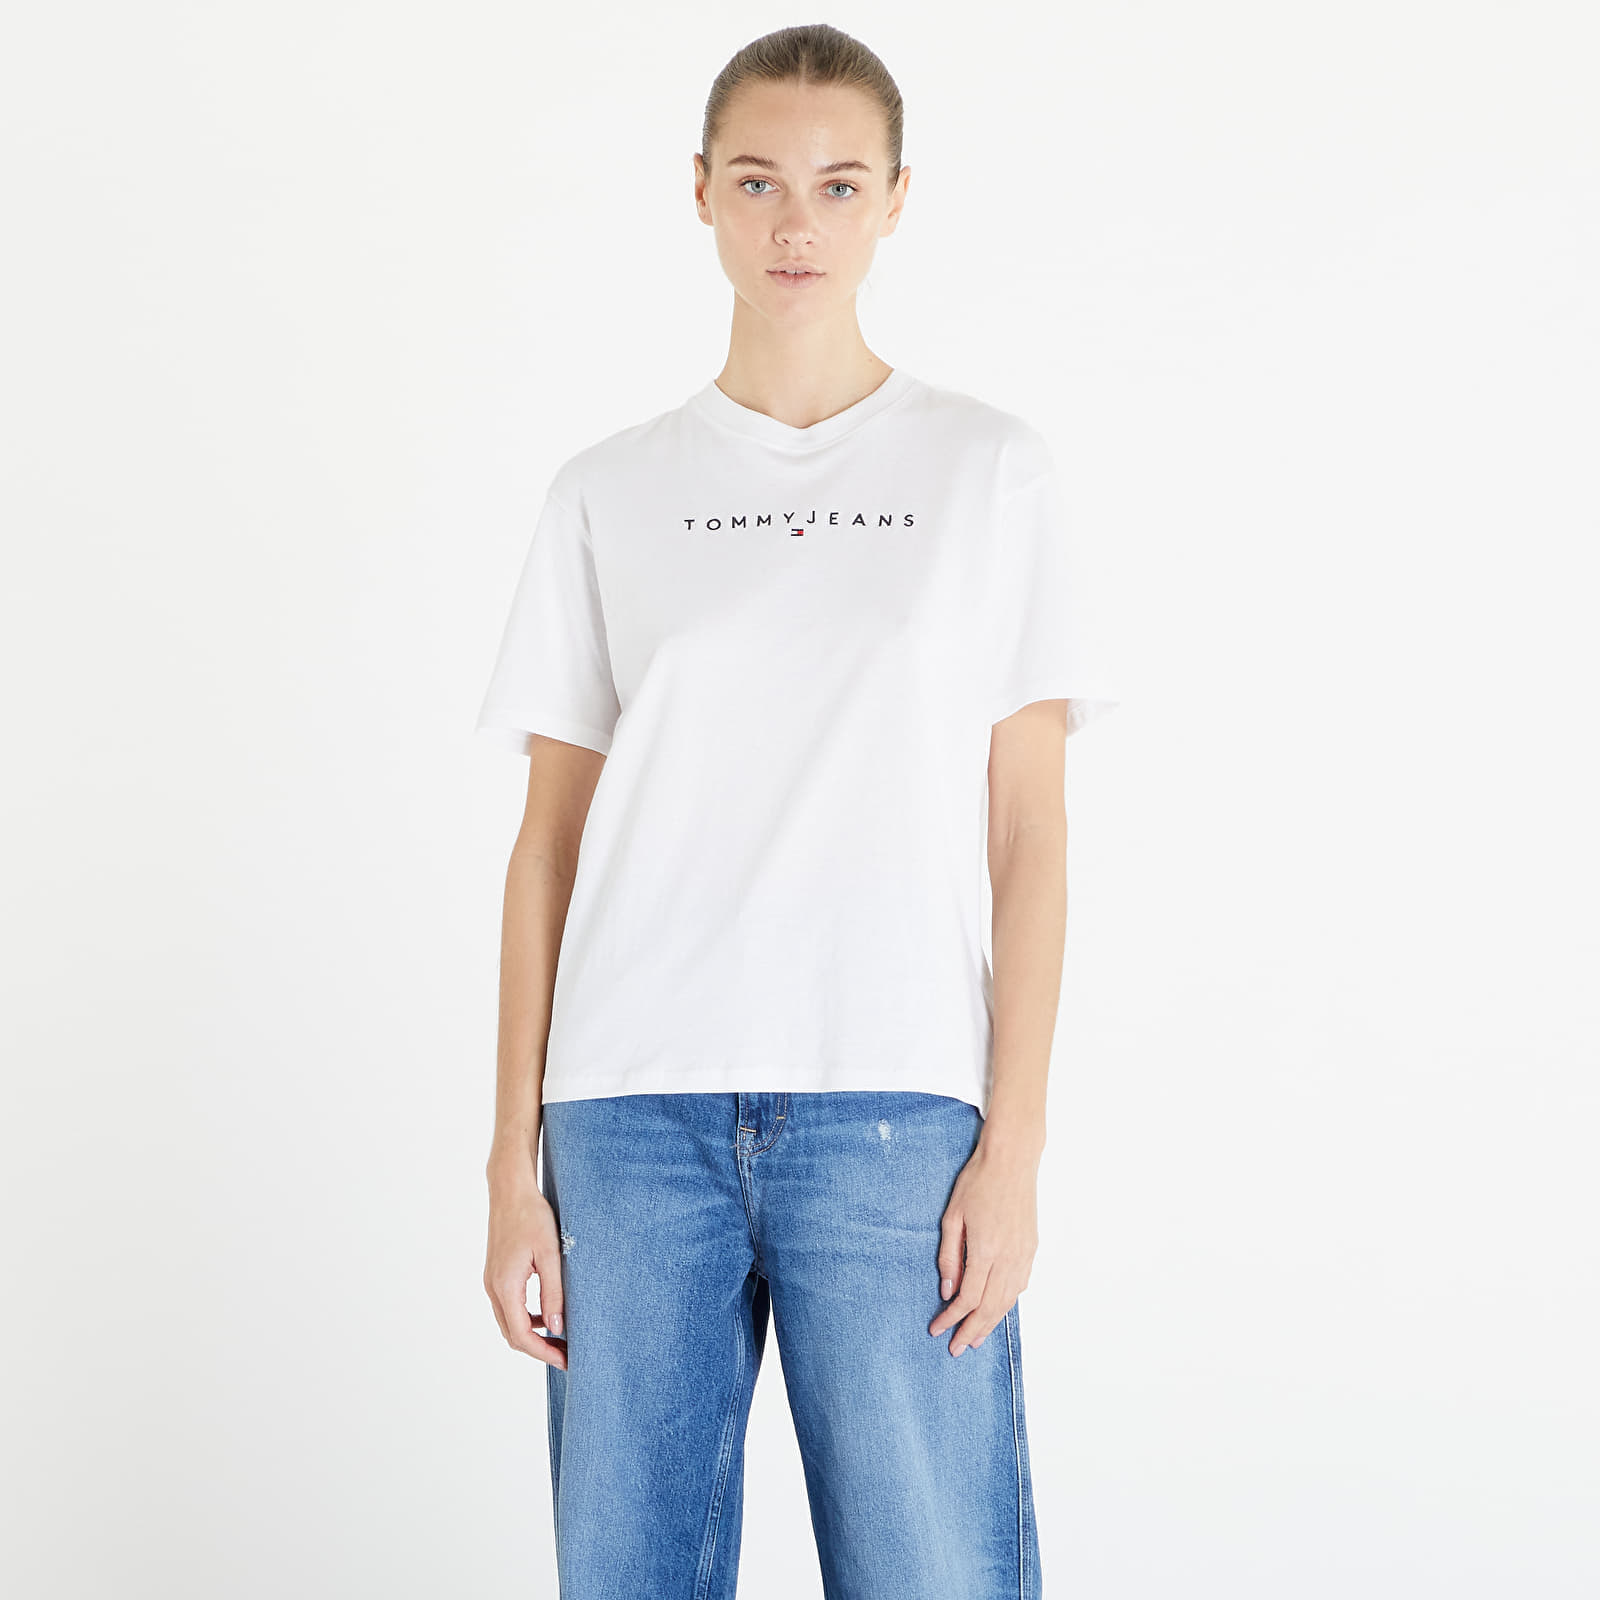 Tommy Hilfiger - Tommy Jeans Relaxed New Linear Short Sleeve Tee White